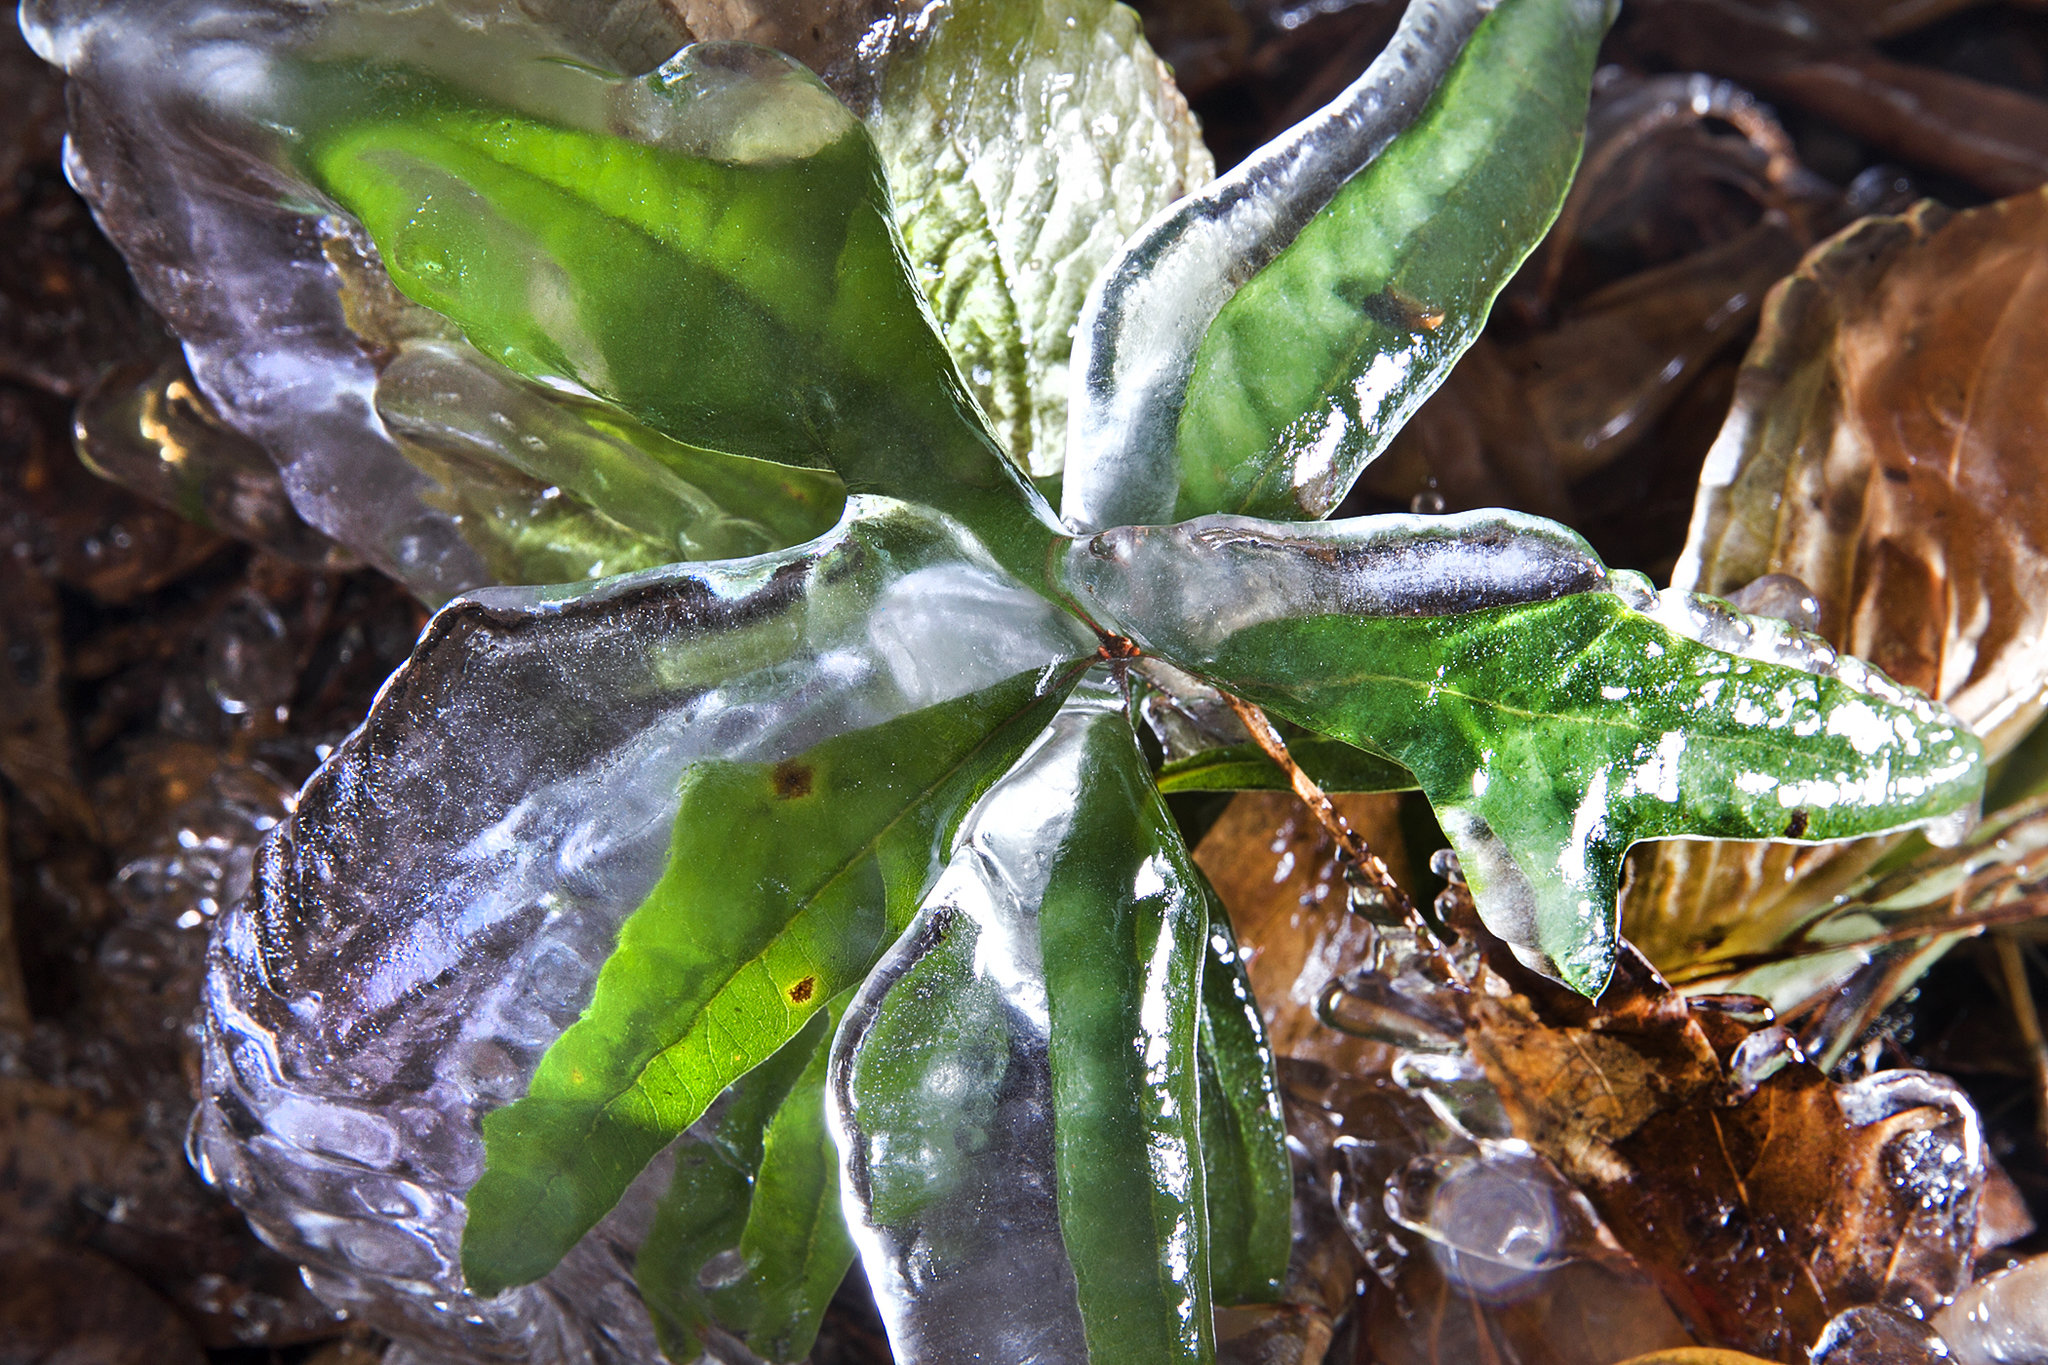 Dead or alive? How to tell if a plant survived the freeze | NOLA.com